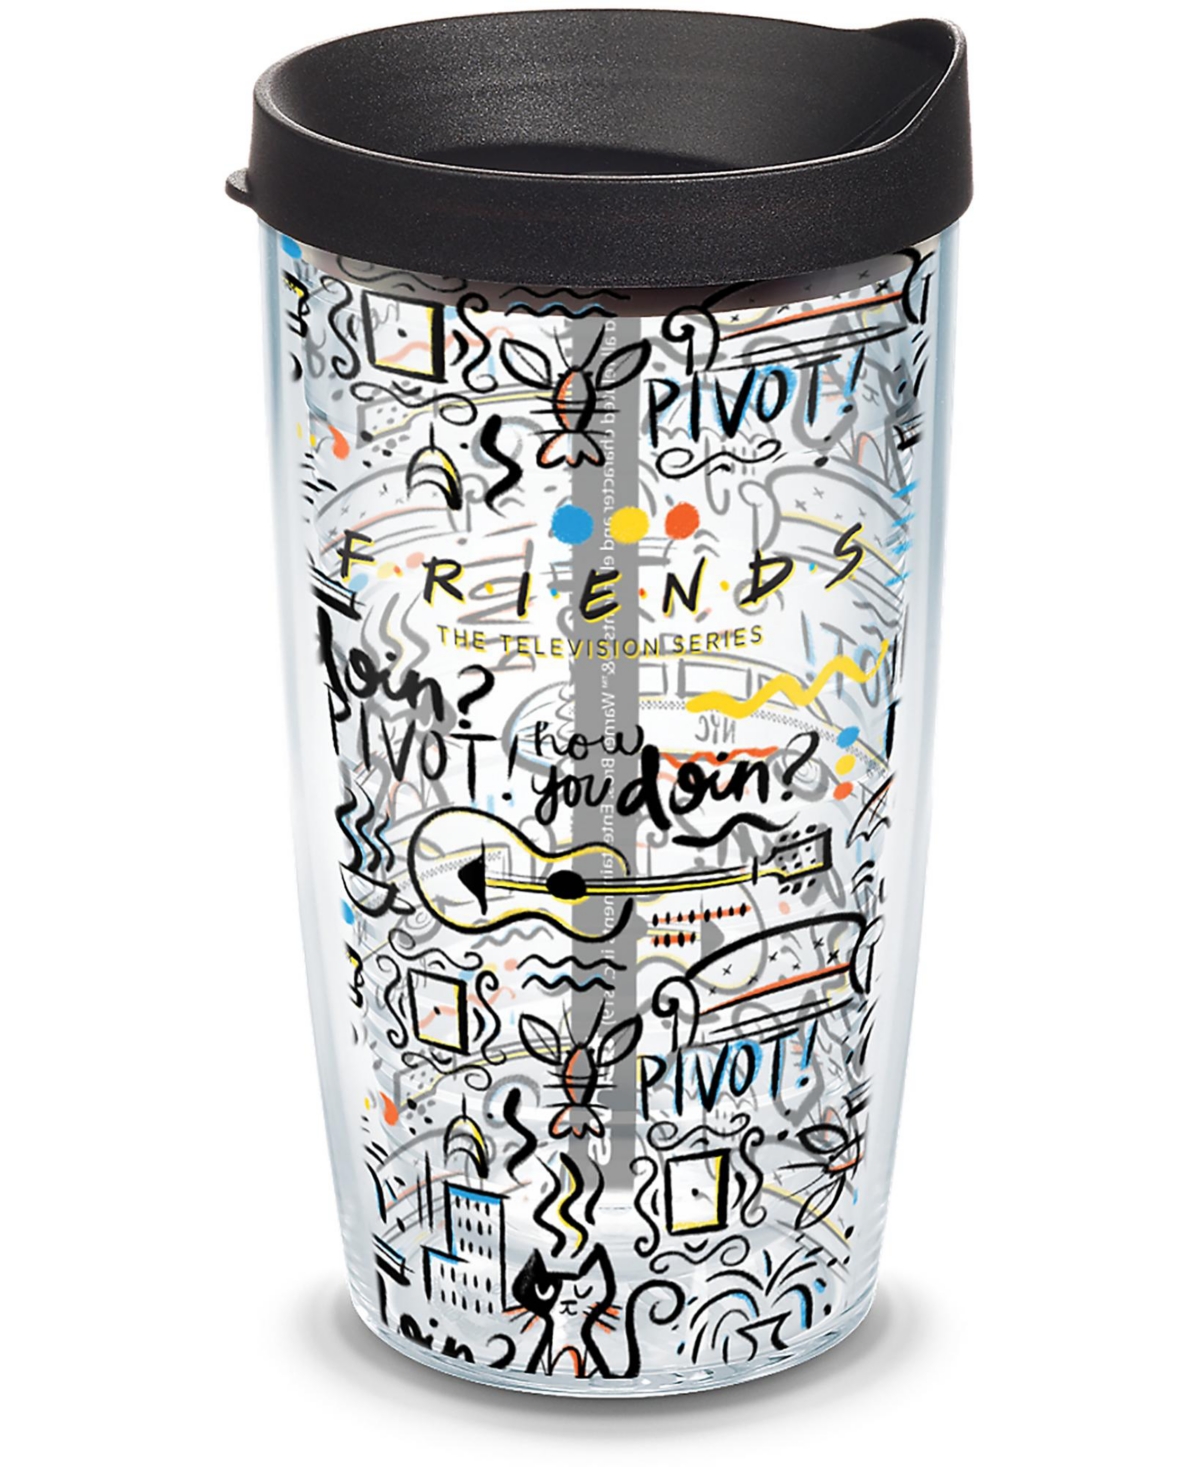 Tervis Tumbler Tervis Friends Pattern Made In Usa Double Walled Insulated Tumbler Travel Cup Keeps Drinks Cold & Ho In Open Miscellaneous